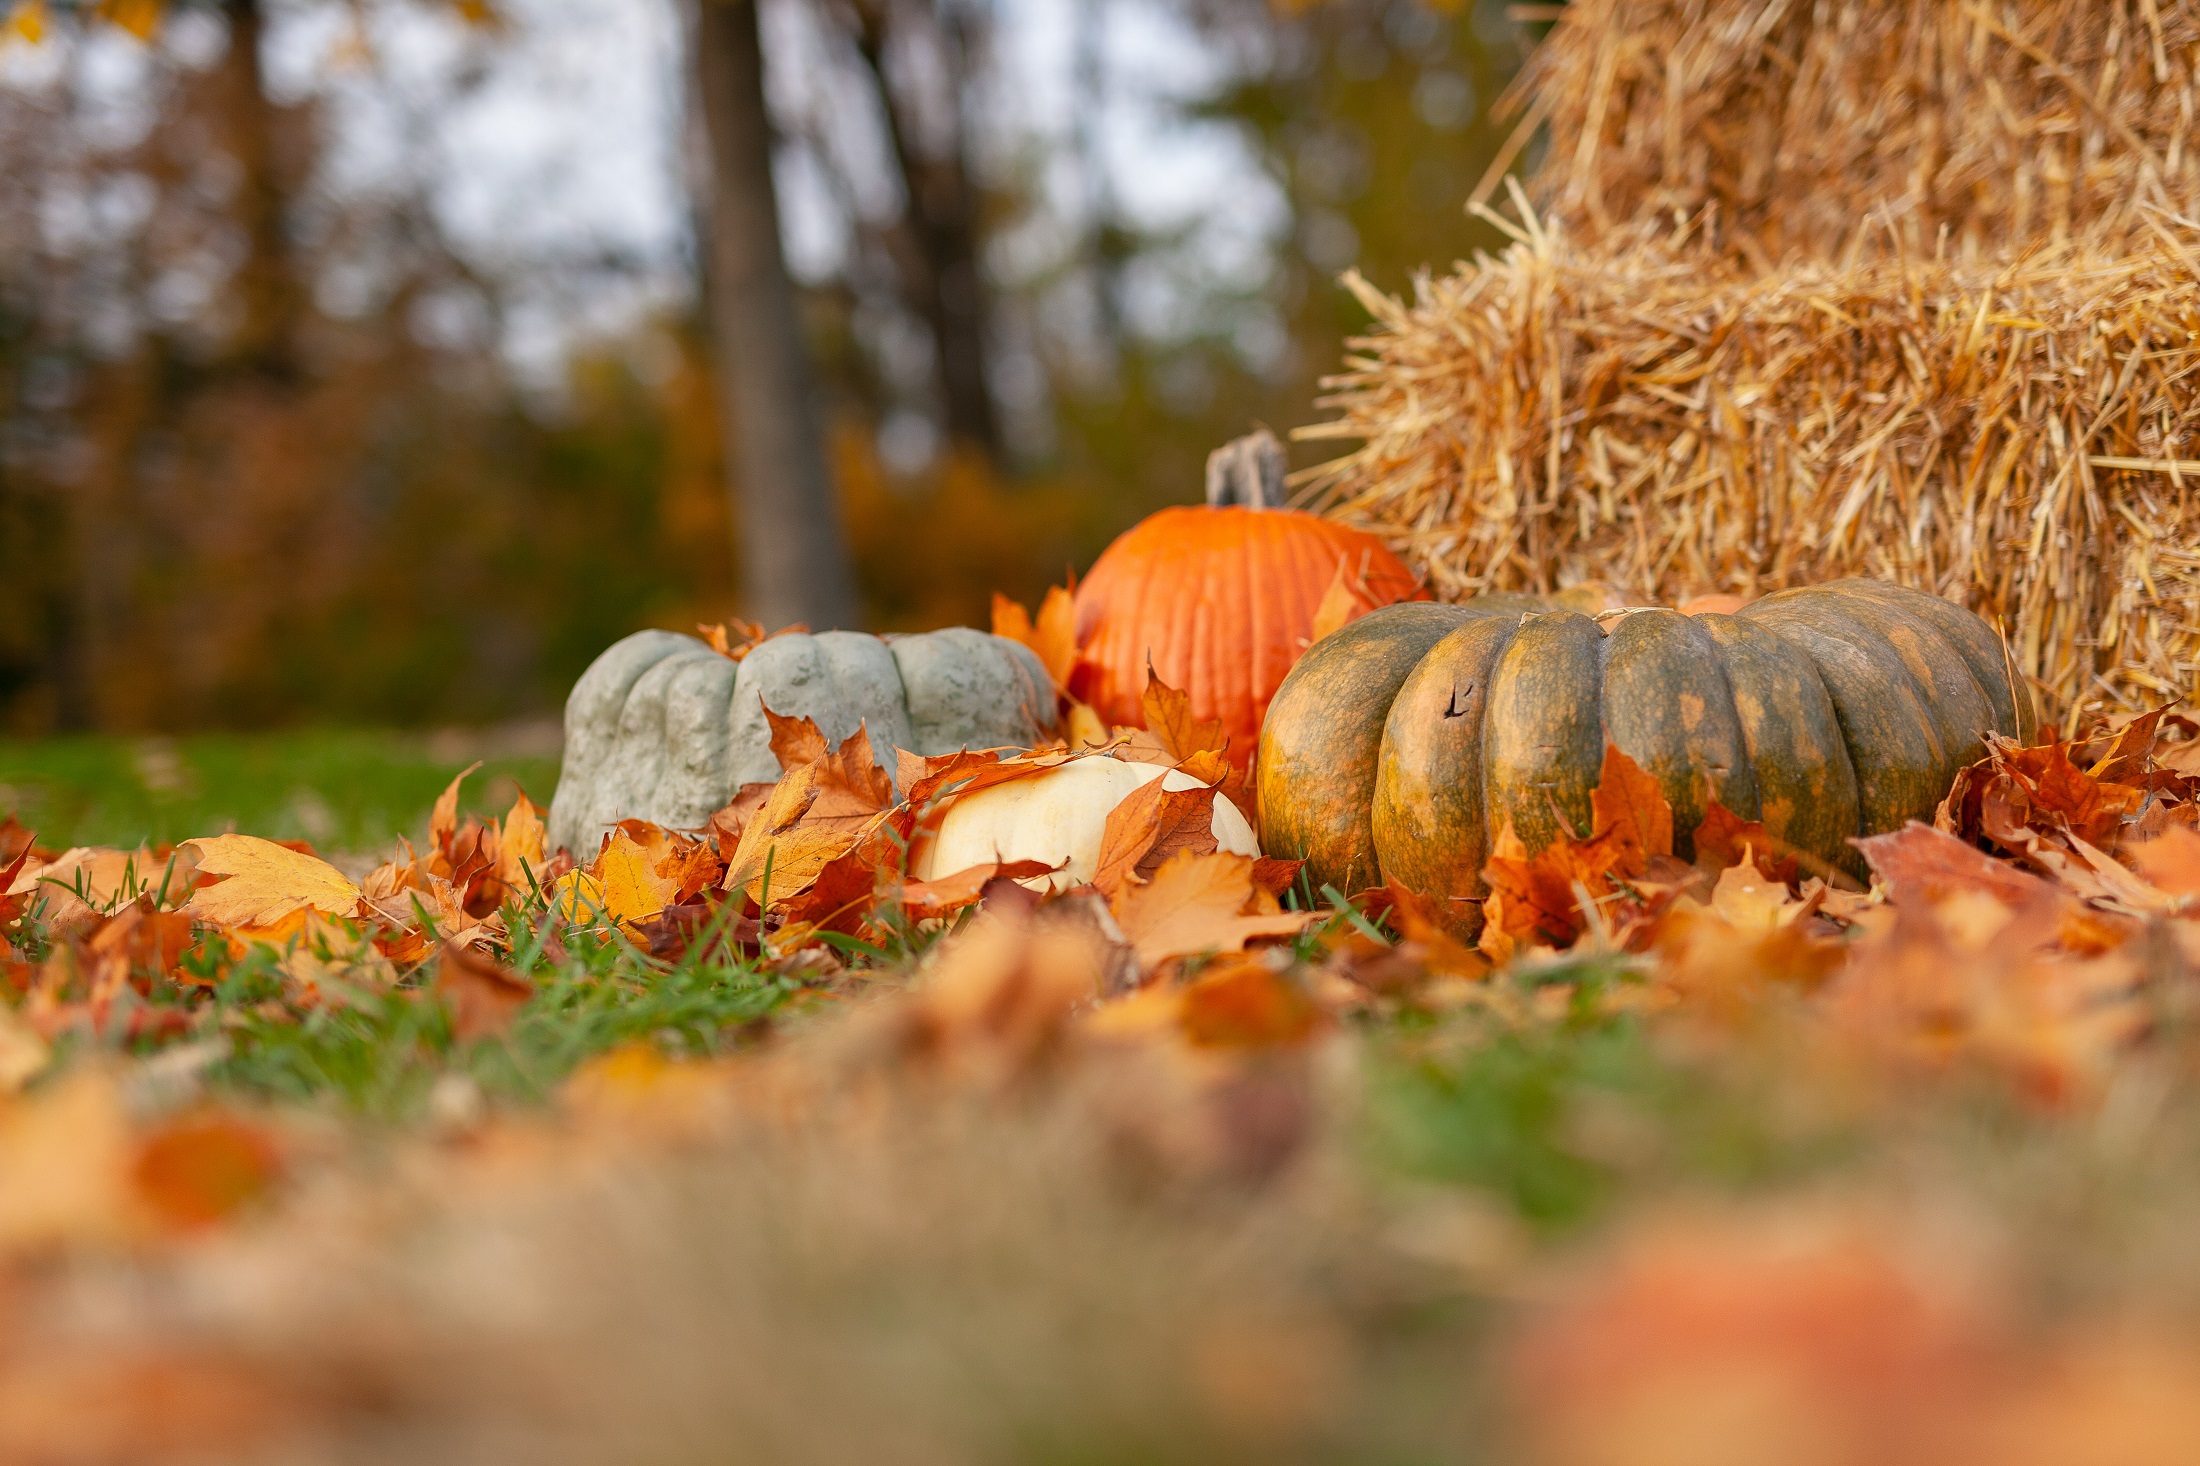 Pumpkins and gourds sit in the grass next to hay bales